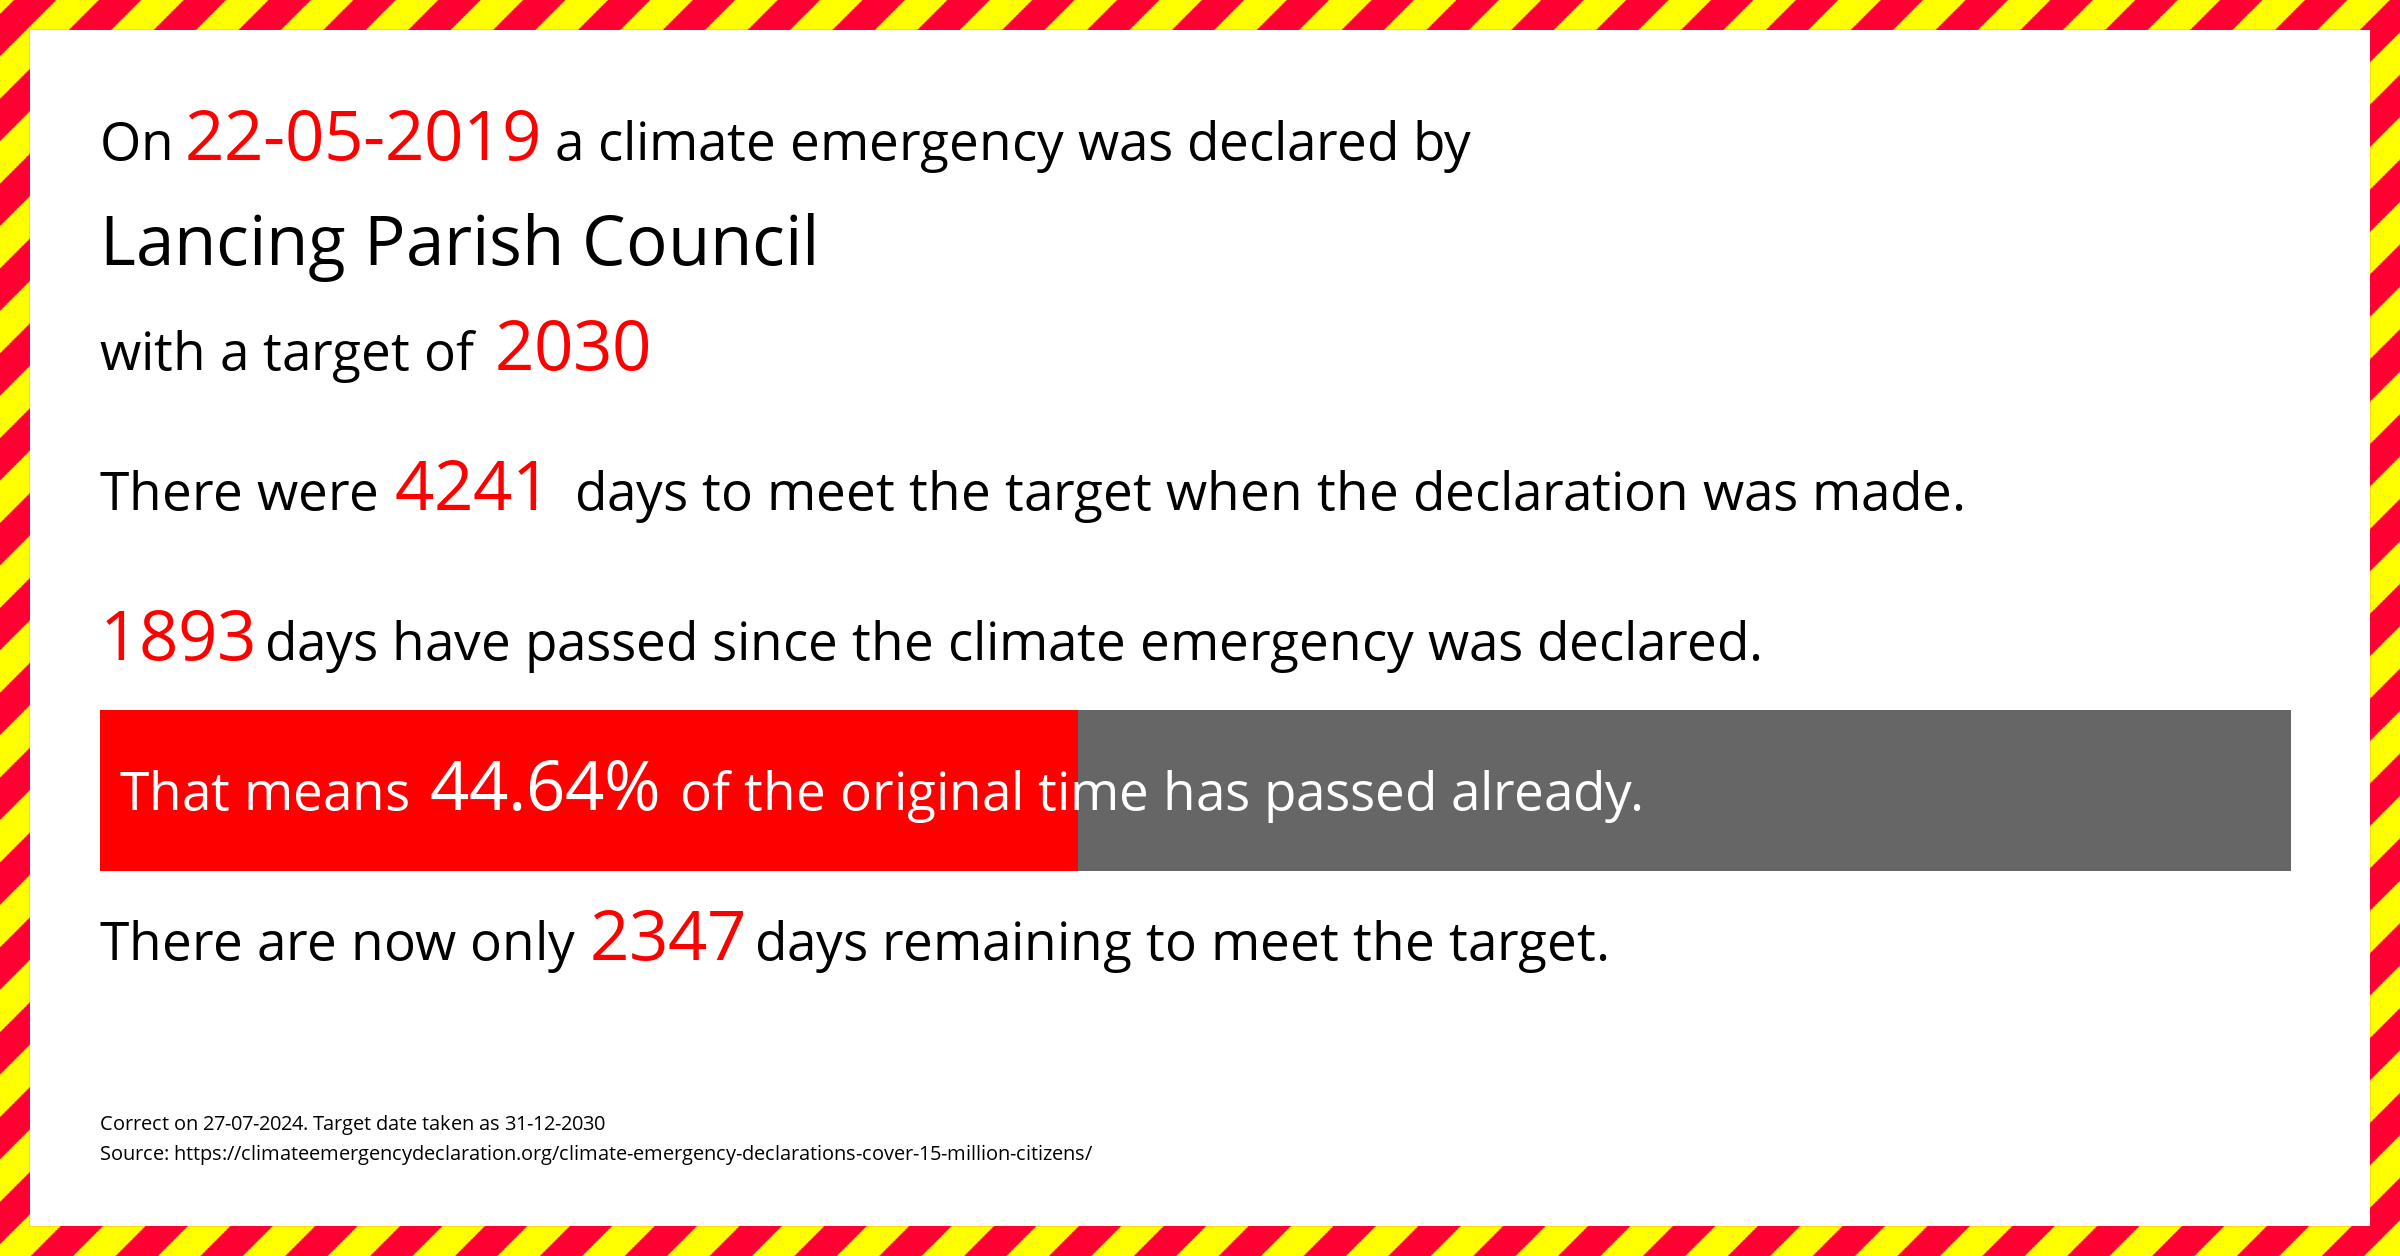 Lancing Parish Council declared a Climate emergency on Wednesday 22nd May 2019, with a target of 2030.